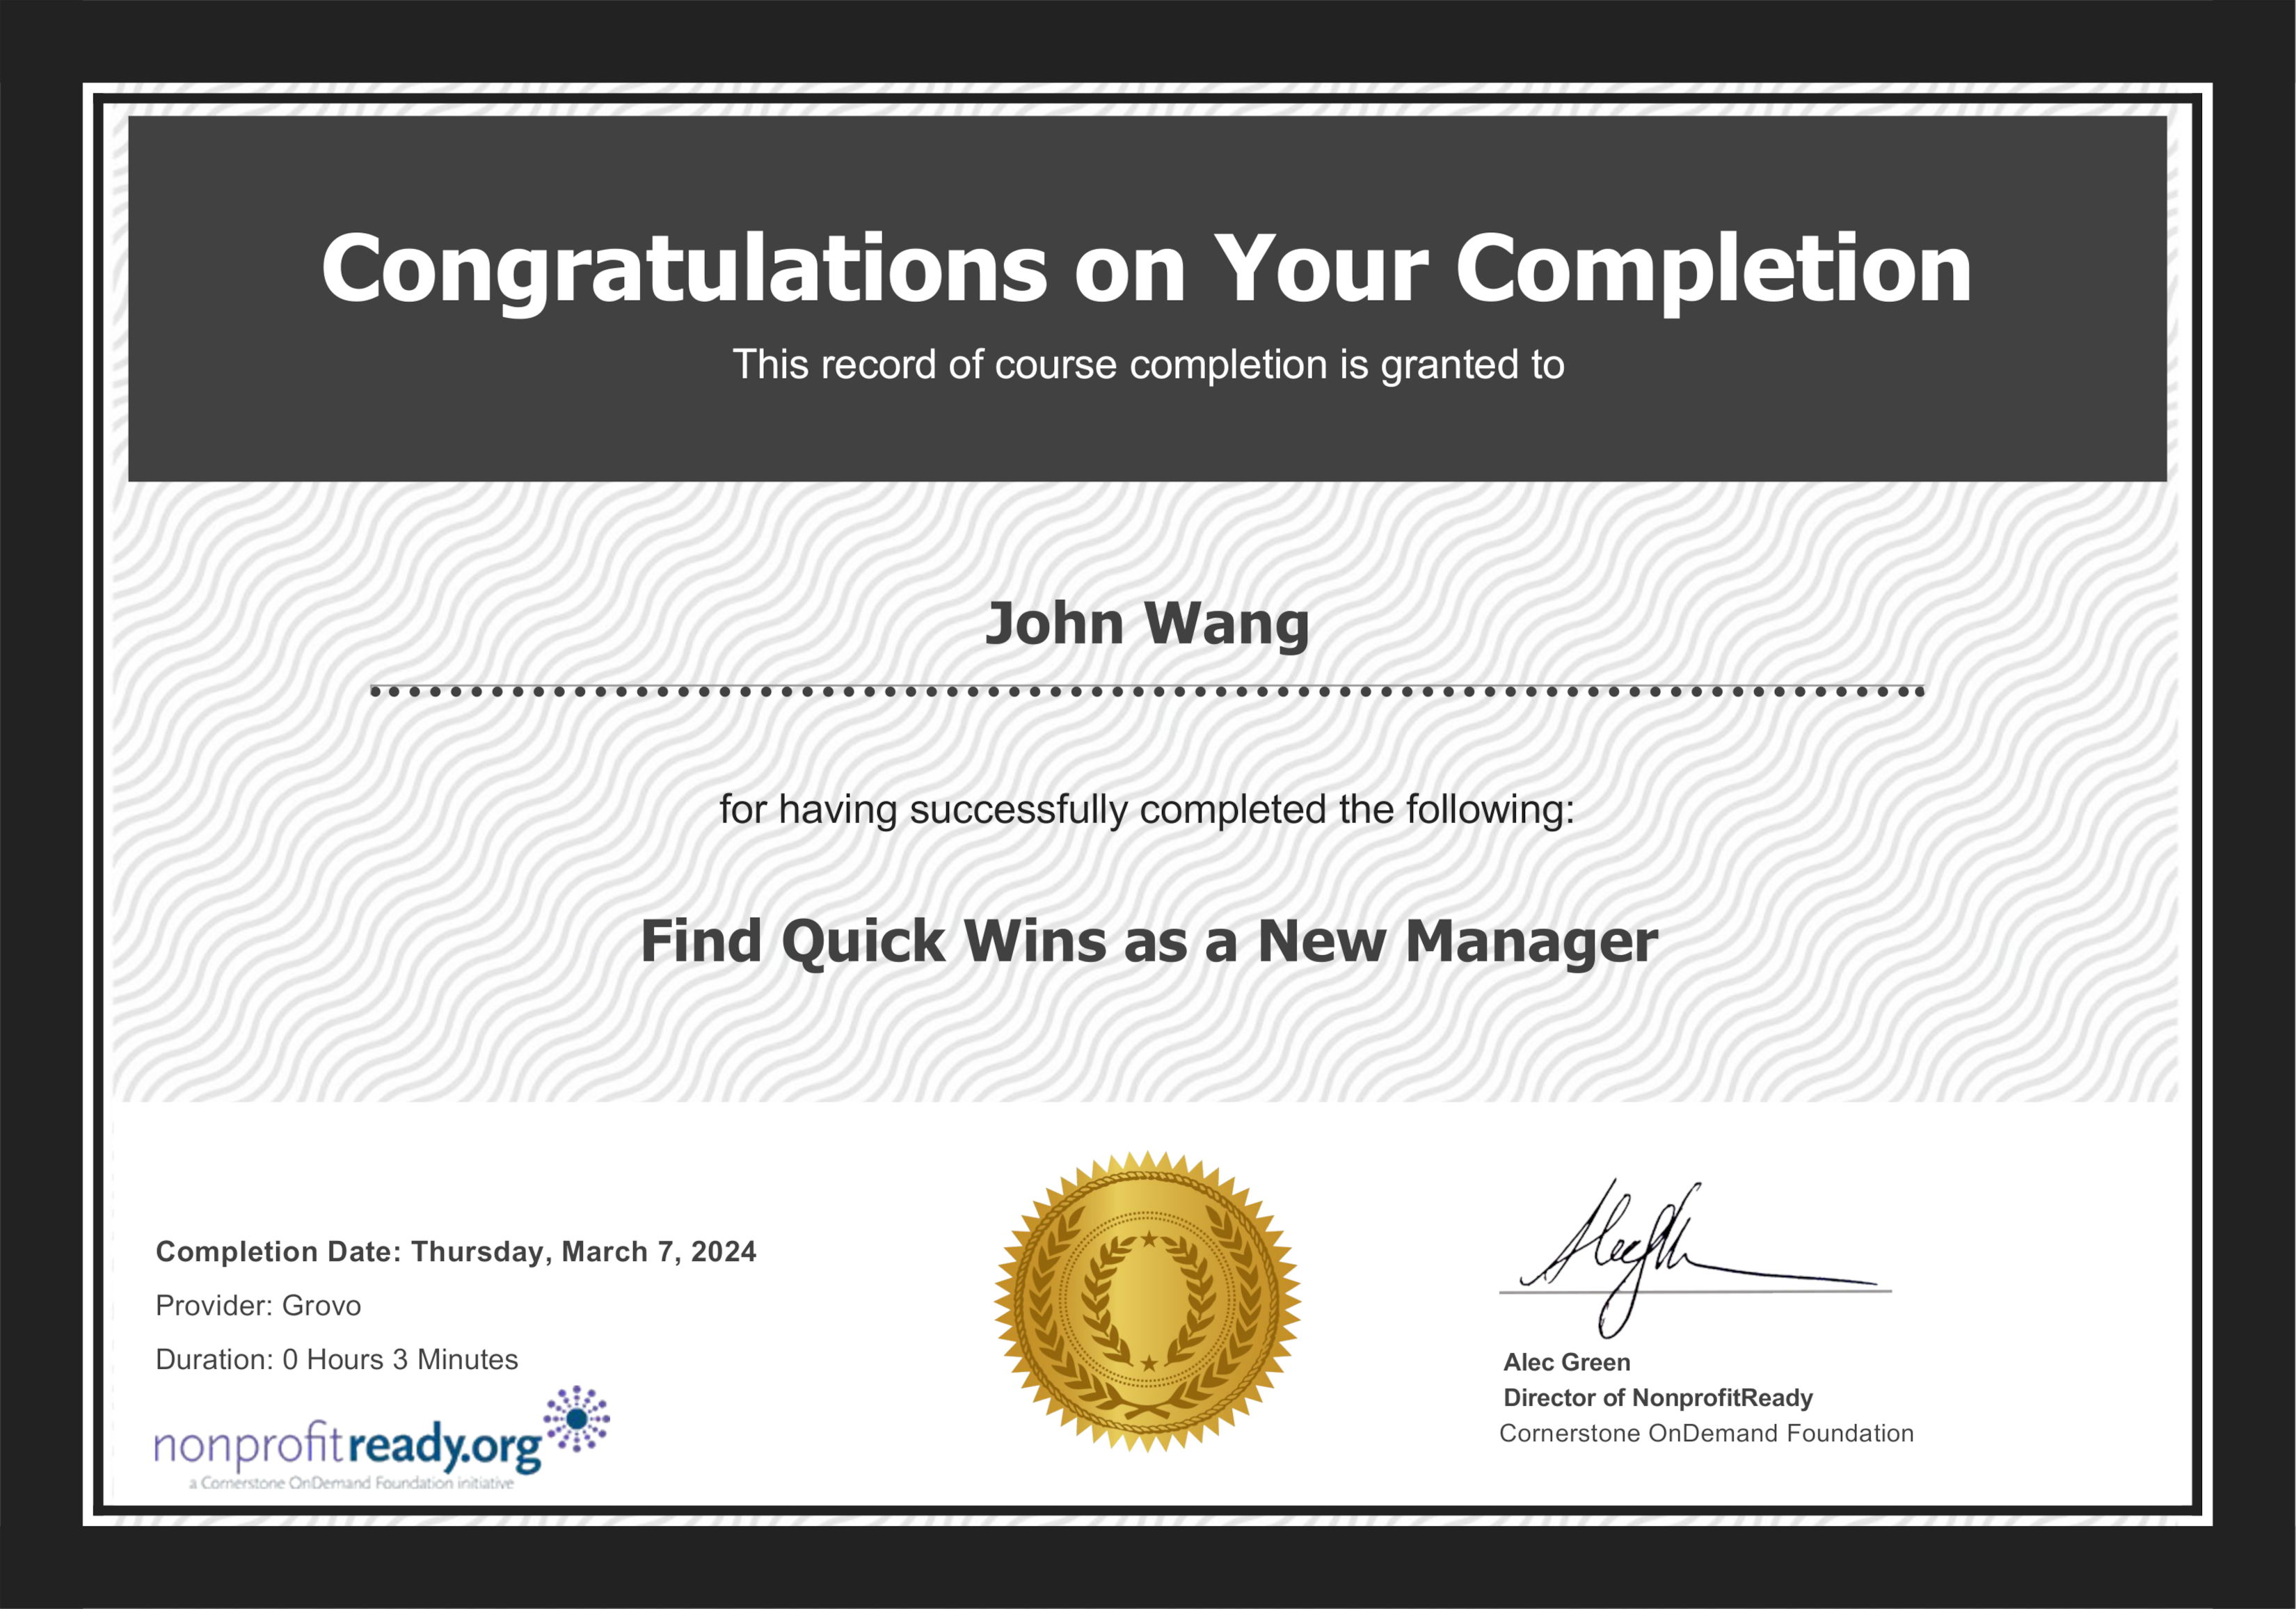 John's Find Quick Wins as a New Manager from NonprofitReady by Grovo